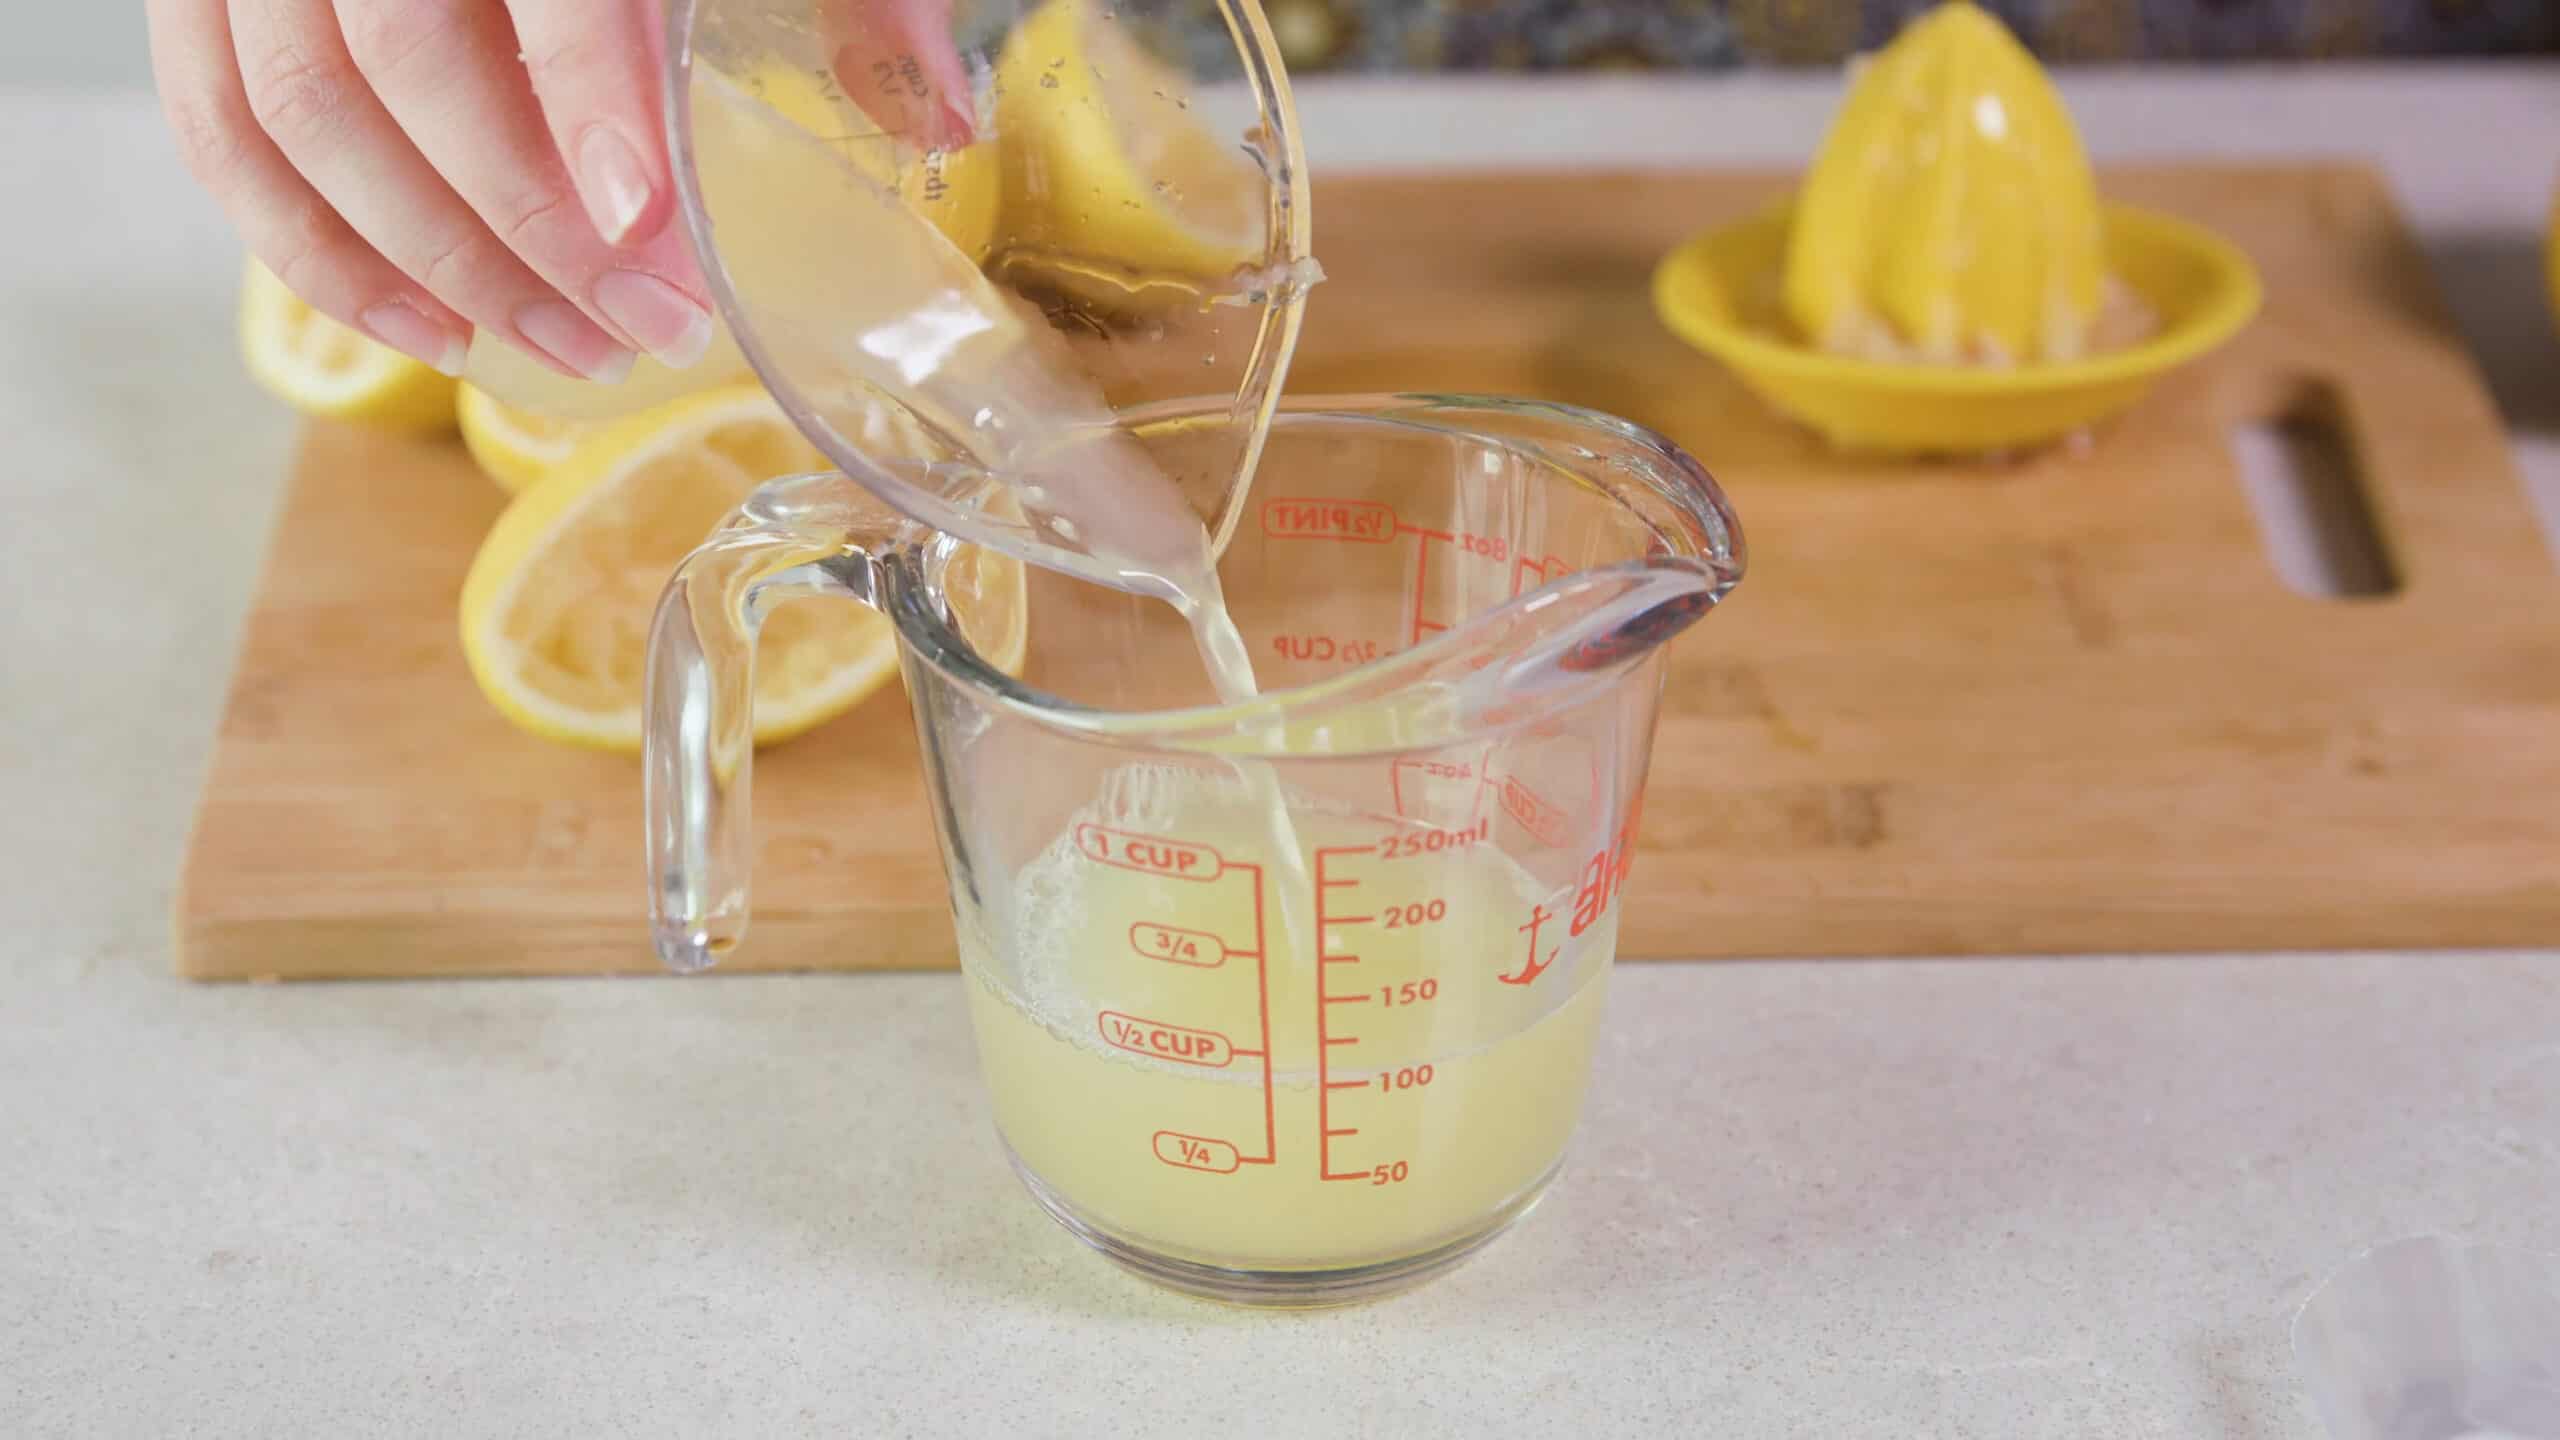 Angled view of clear glass measuring cup being filled with lemon juice from a hand held juicing cup, with a wood cutting board and lemon slices in the background.